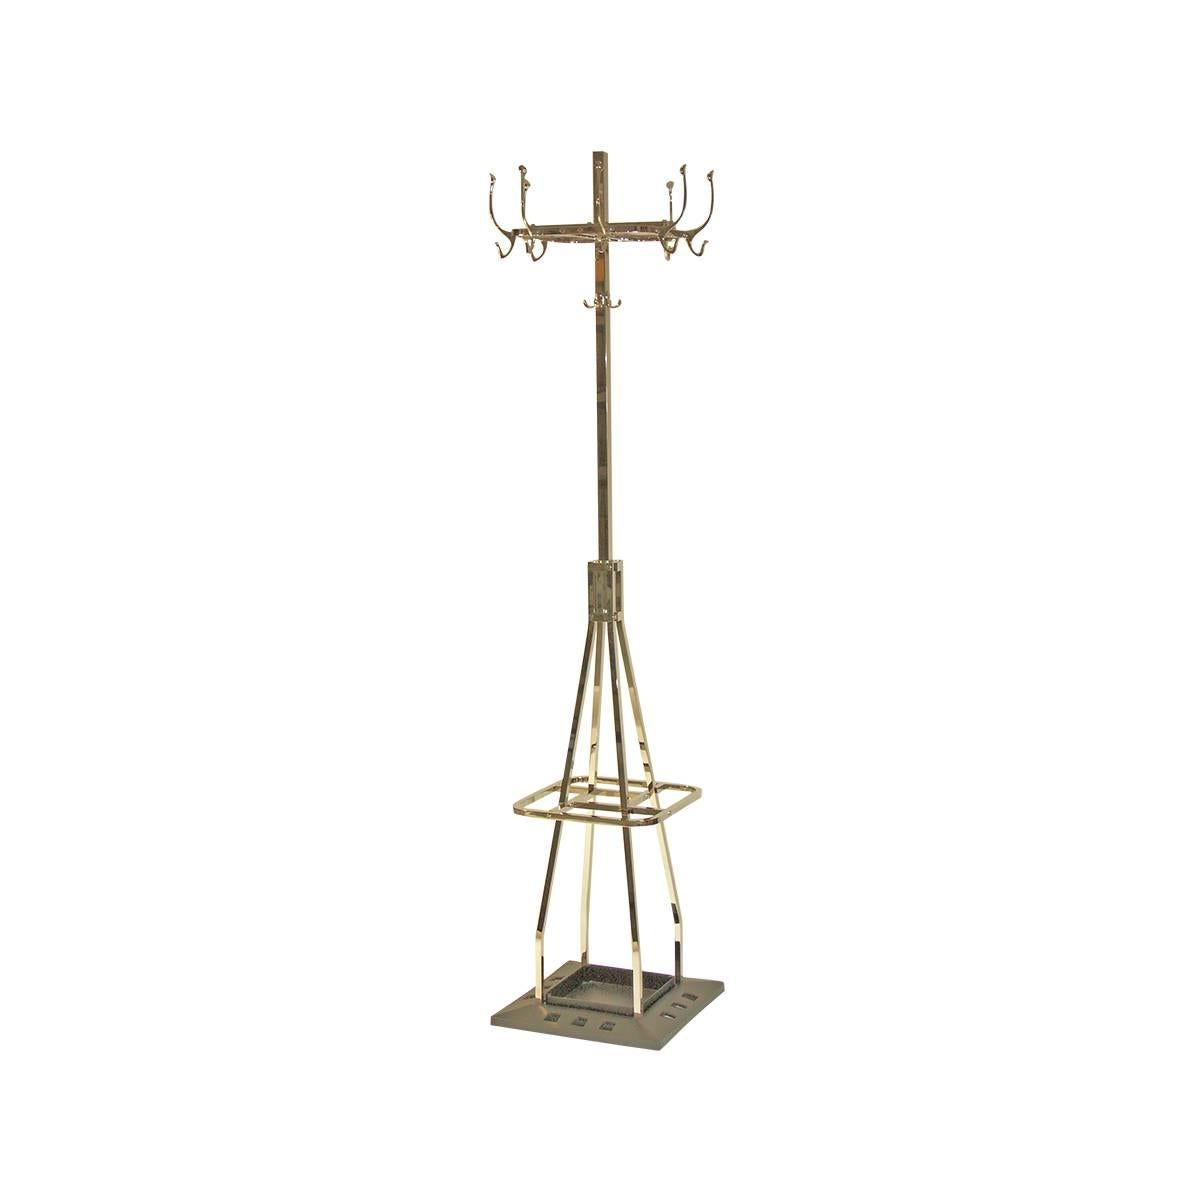 Designed for the Capua Cafe in Vienna in 1913. Upper part turnable / space-saving, umbrella-stand, hat-hook, very heavy base, now manufactured at the WOKA workshop in Vienna. Material: Brass, optionally varnished or nickel-plated, all other finishes